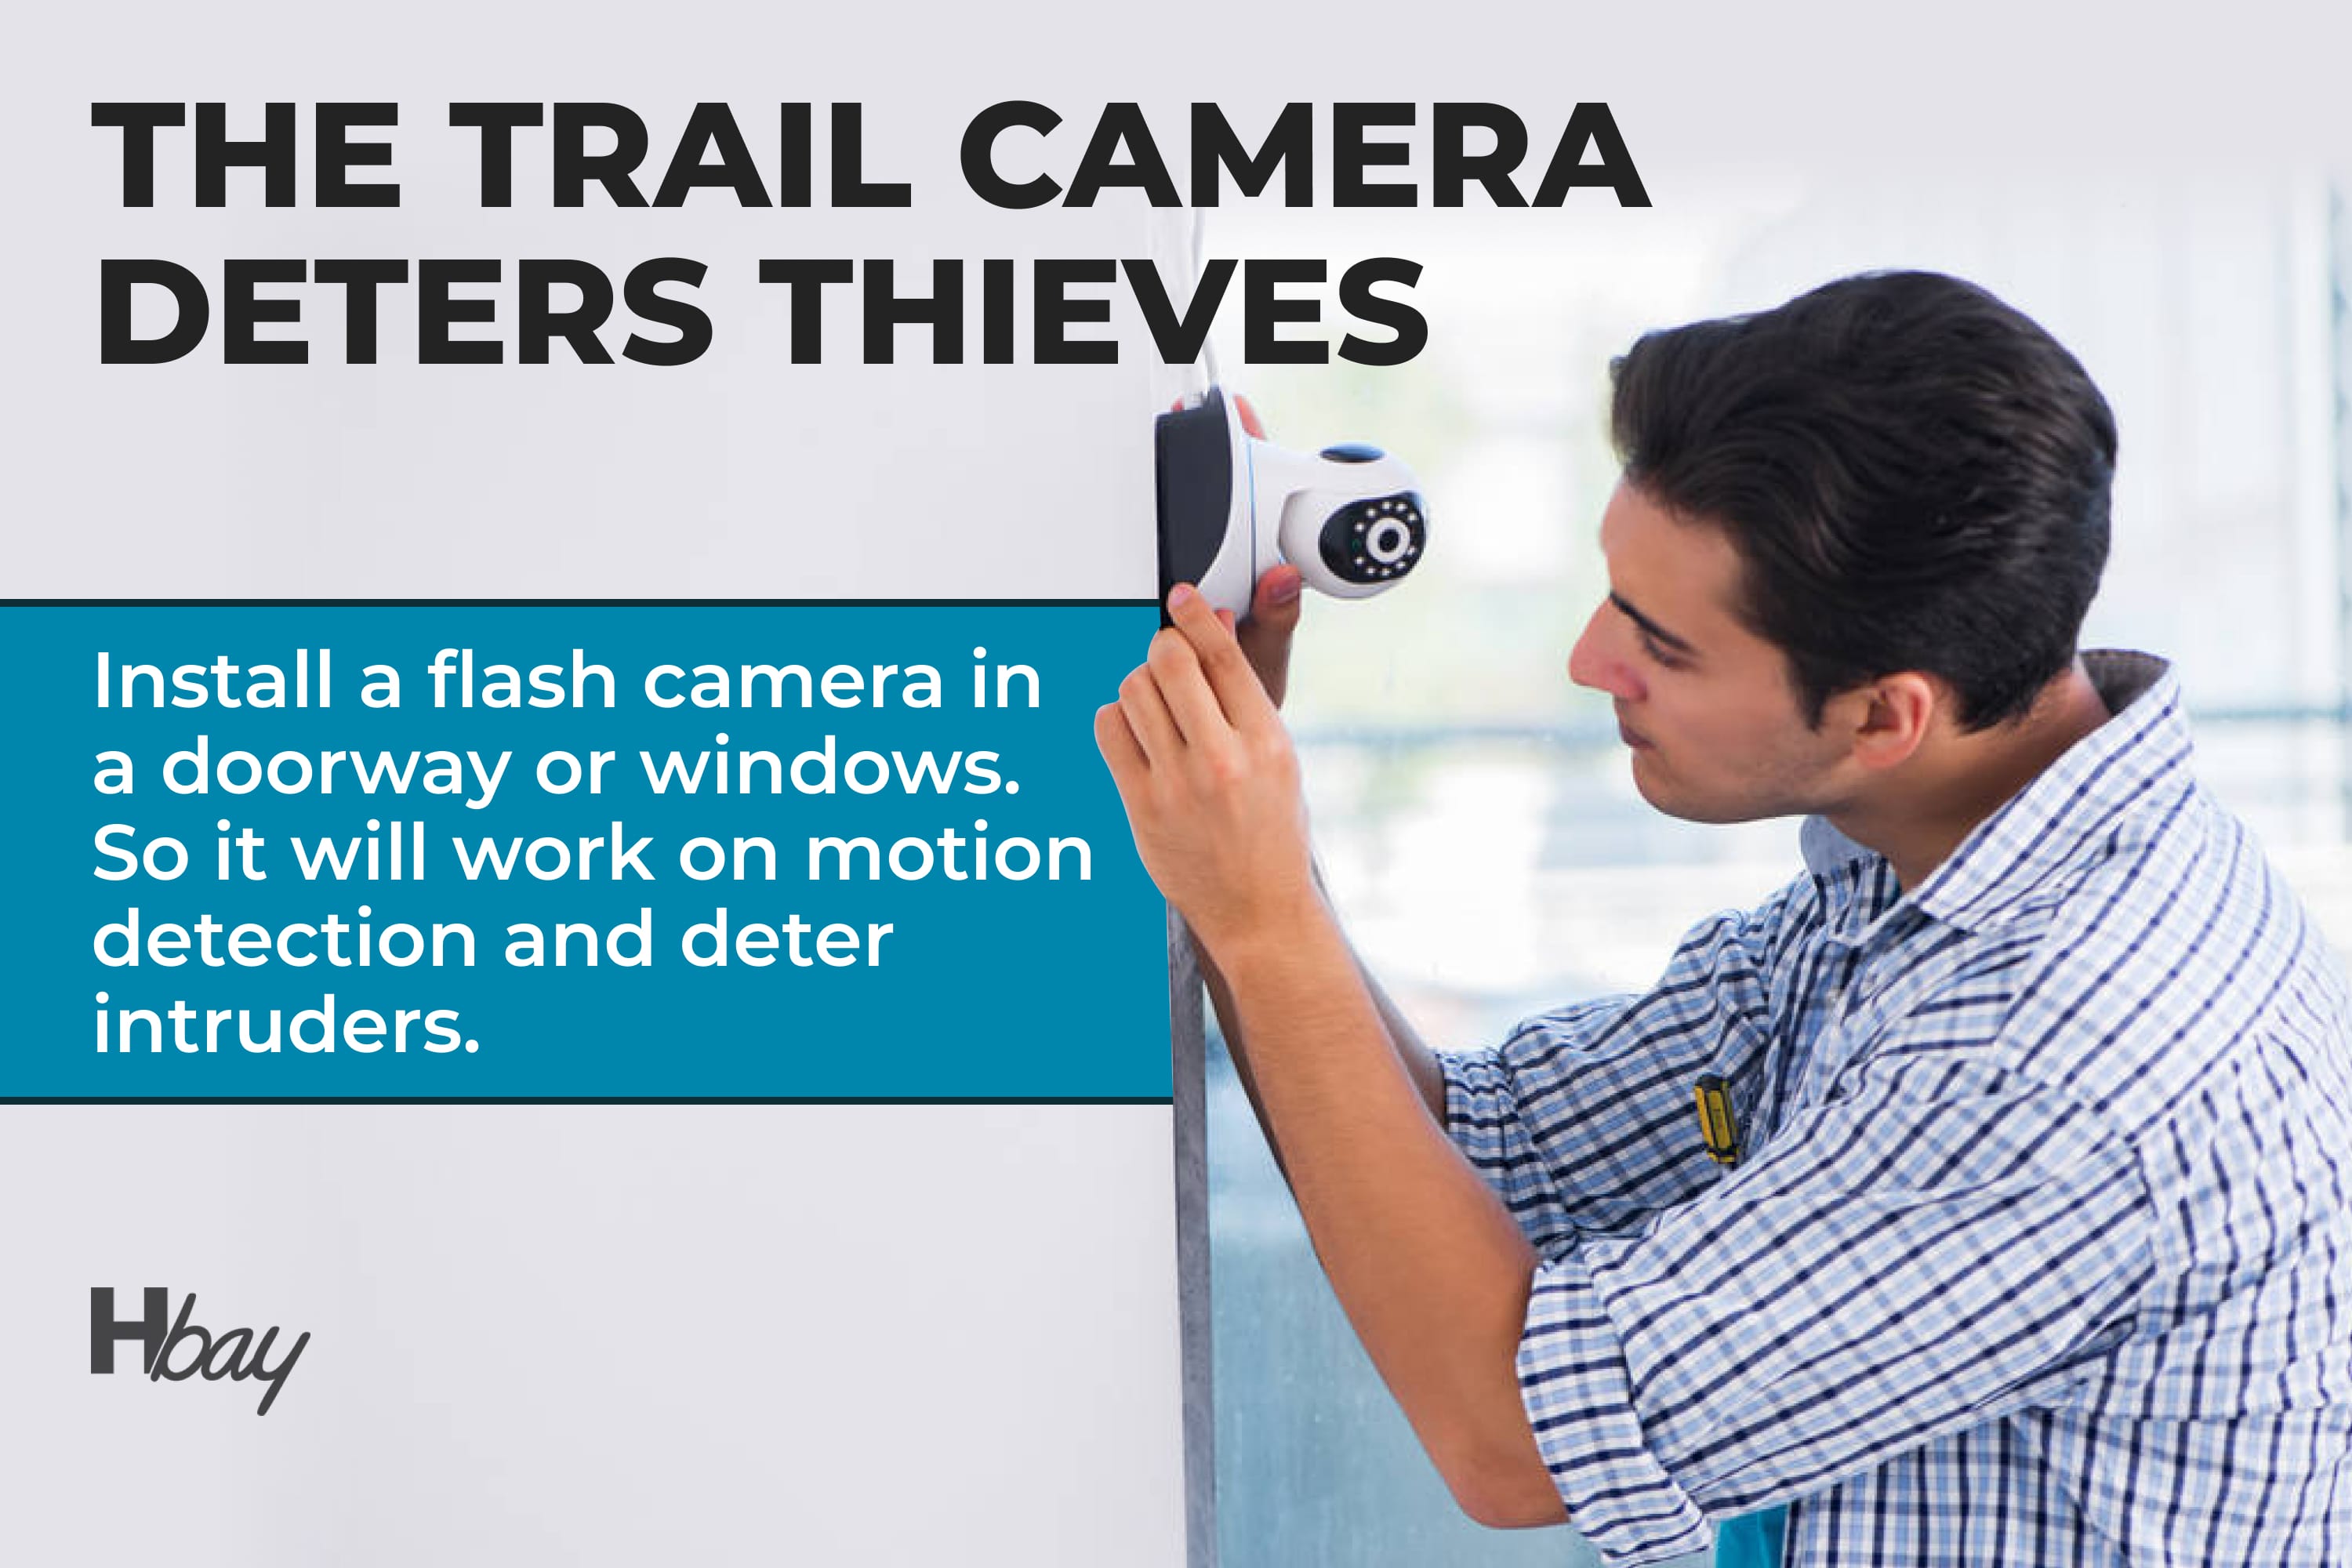 The trail camera deters thieves